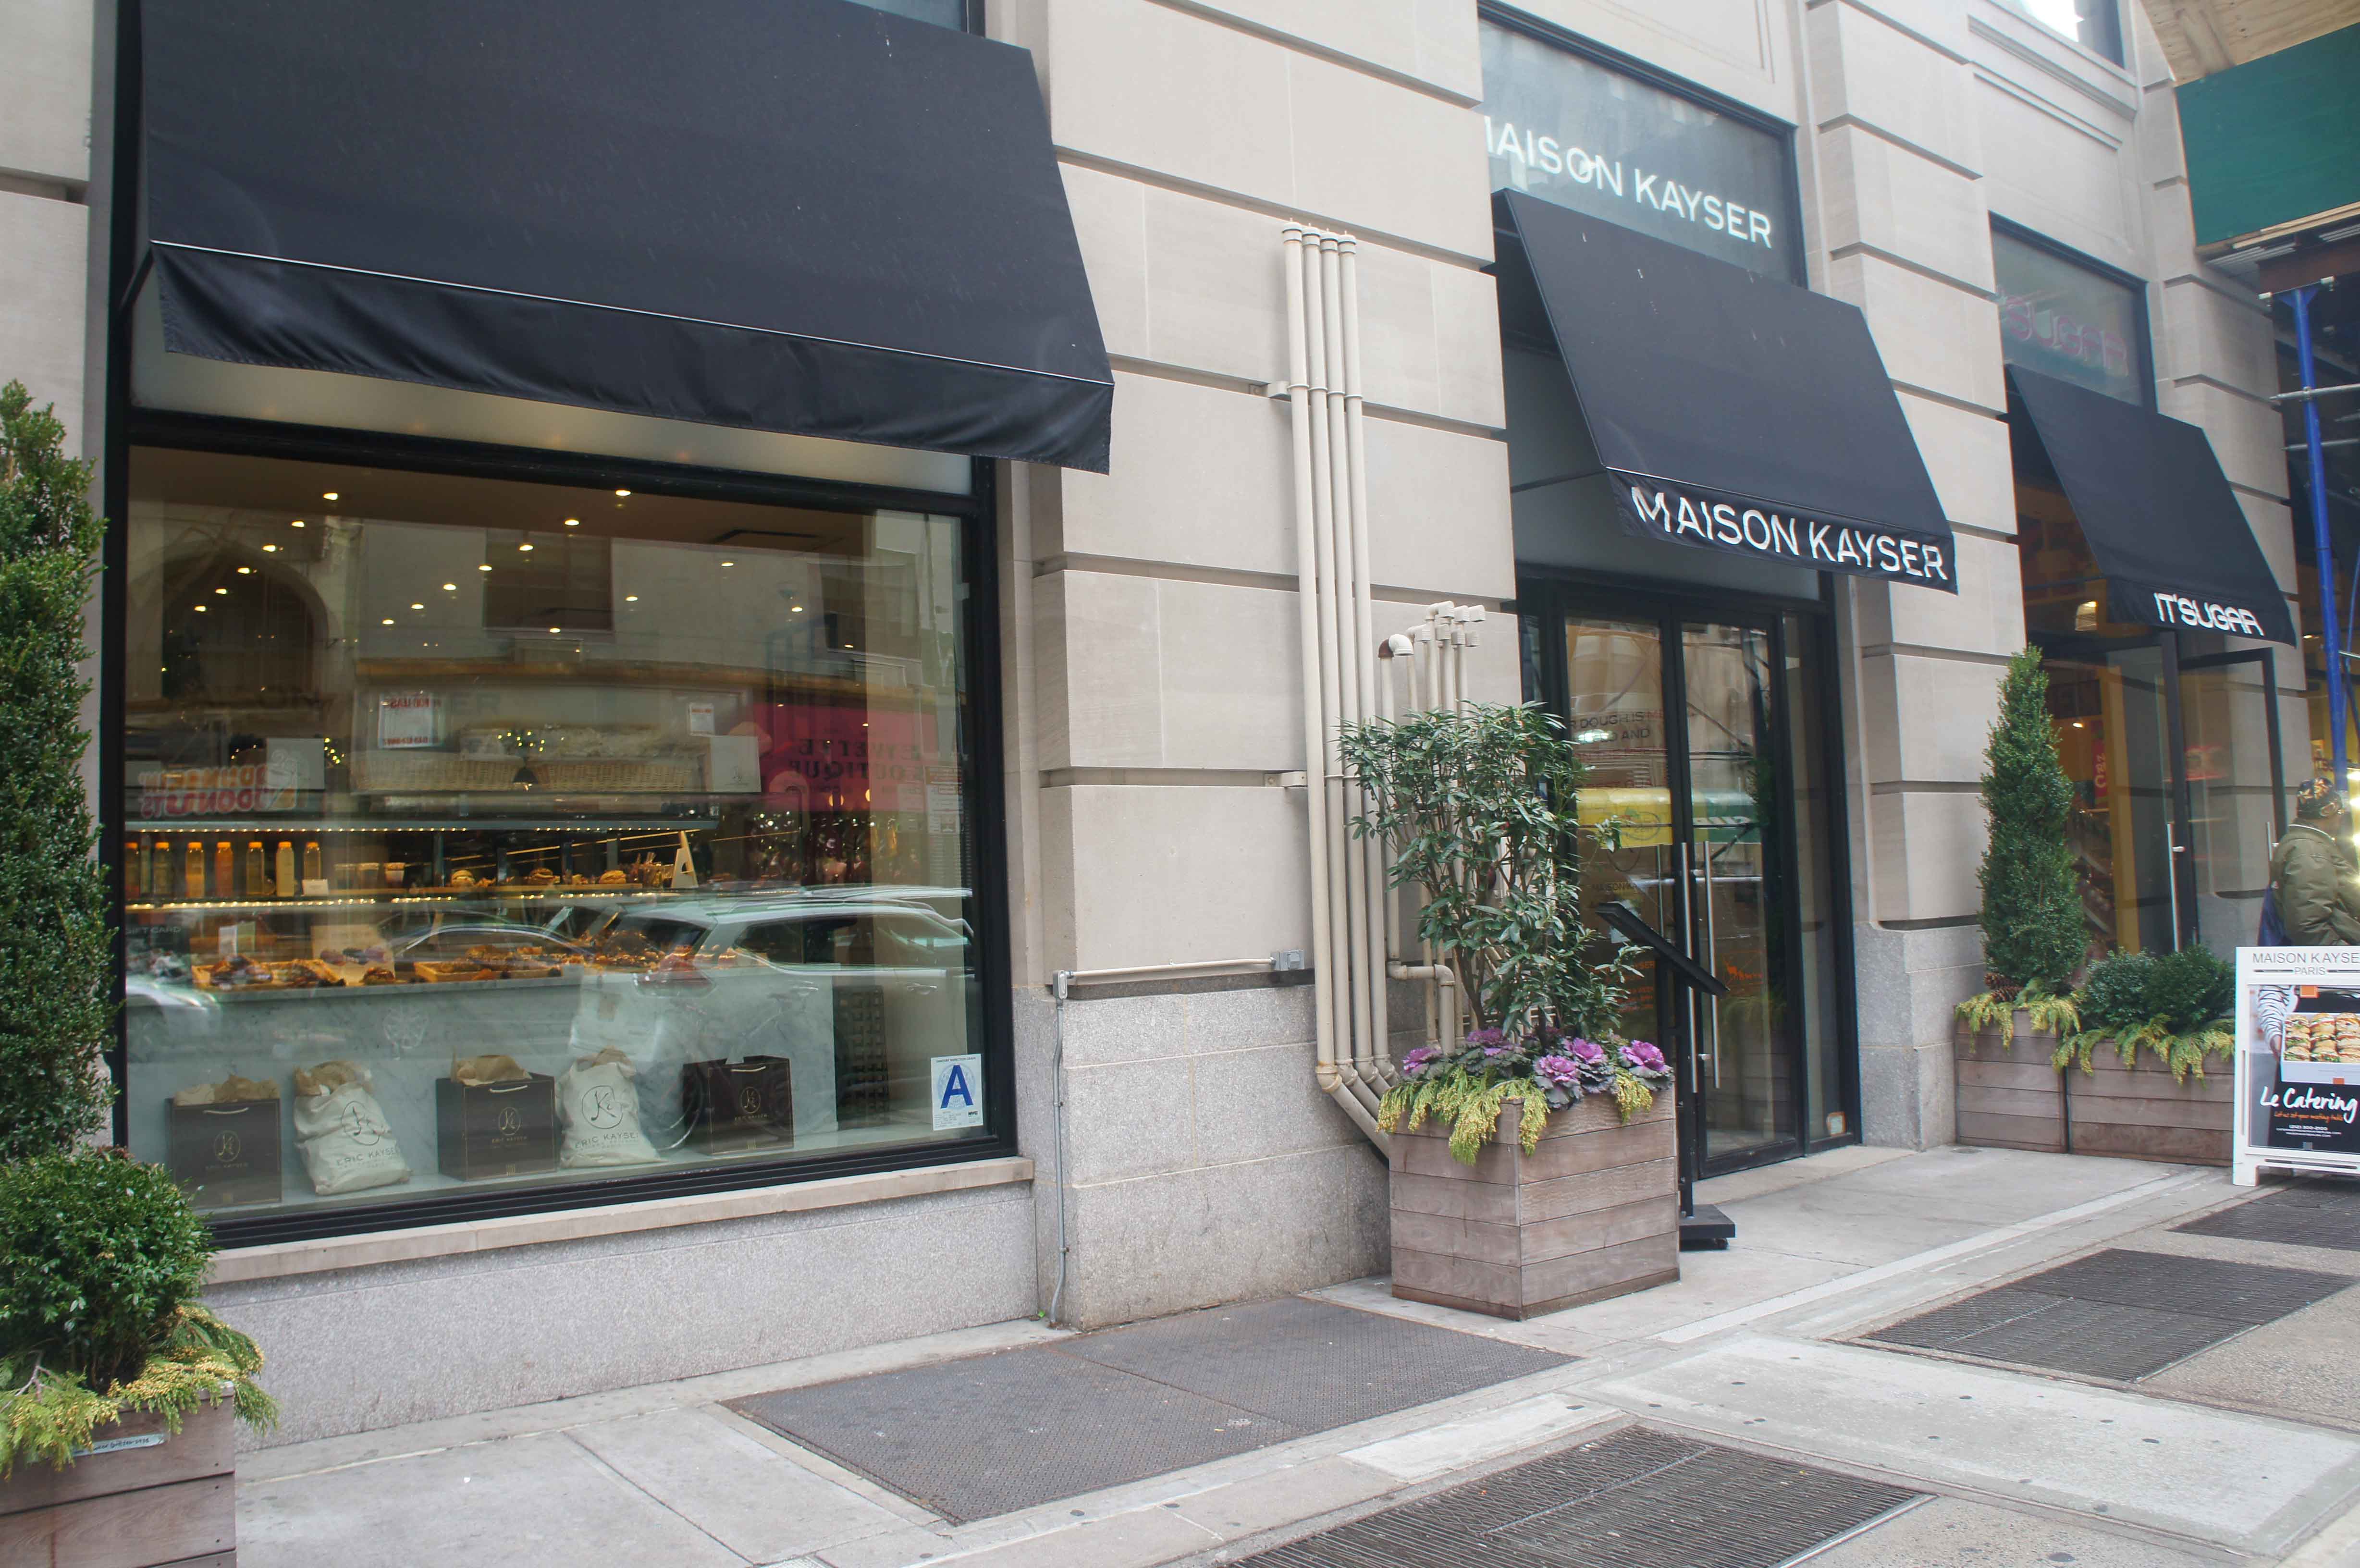 New Yorkers love Maison Kayser, the chain of authentic French boulangeries – and 2 Pierrepont Street residents will be delighted to have one so close to home